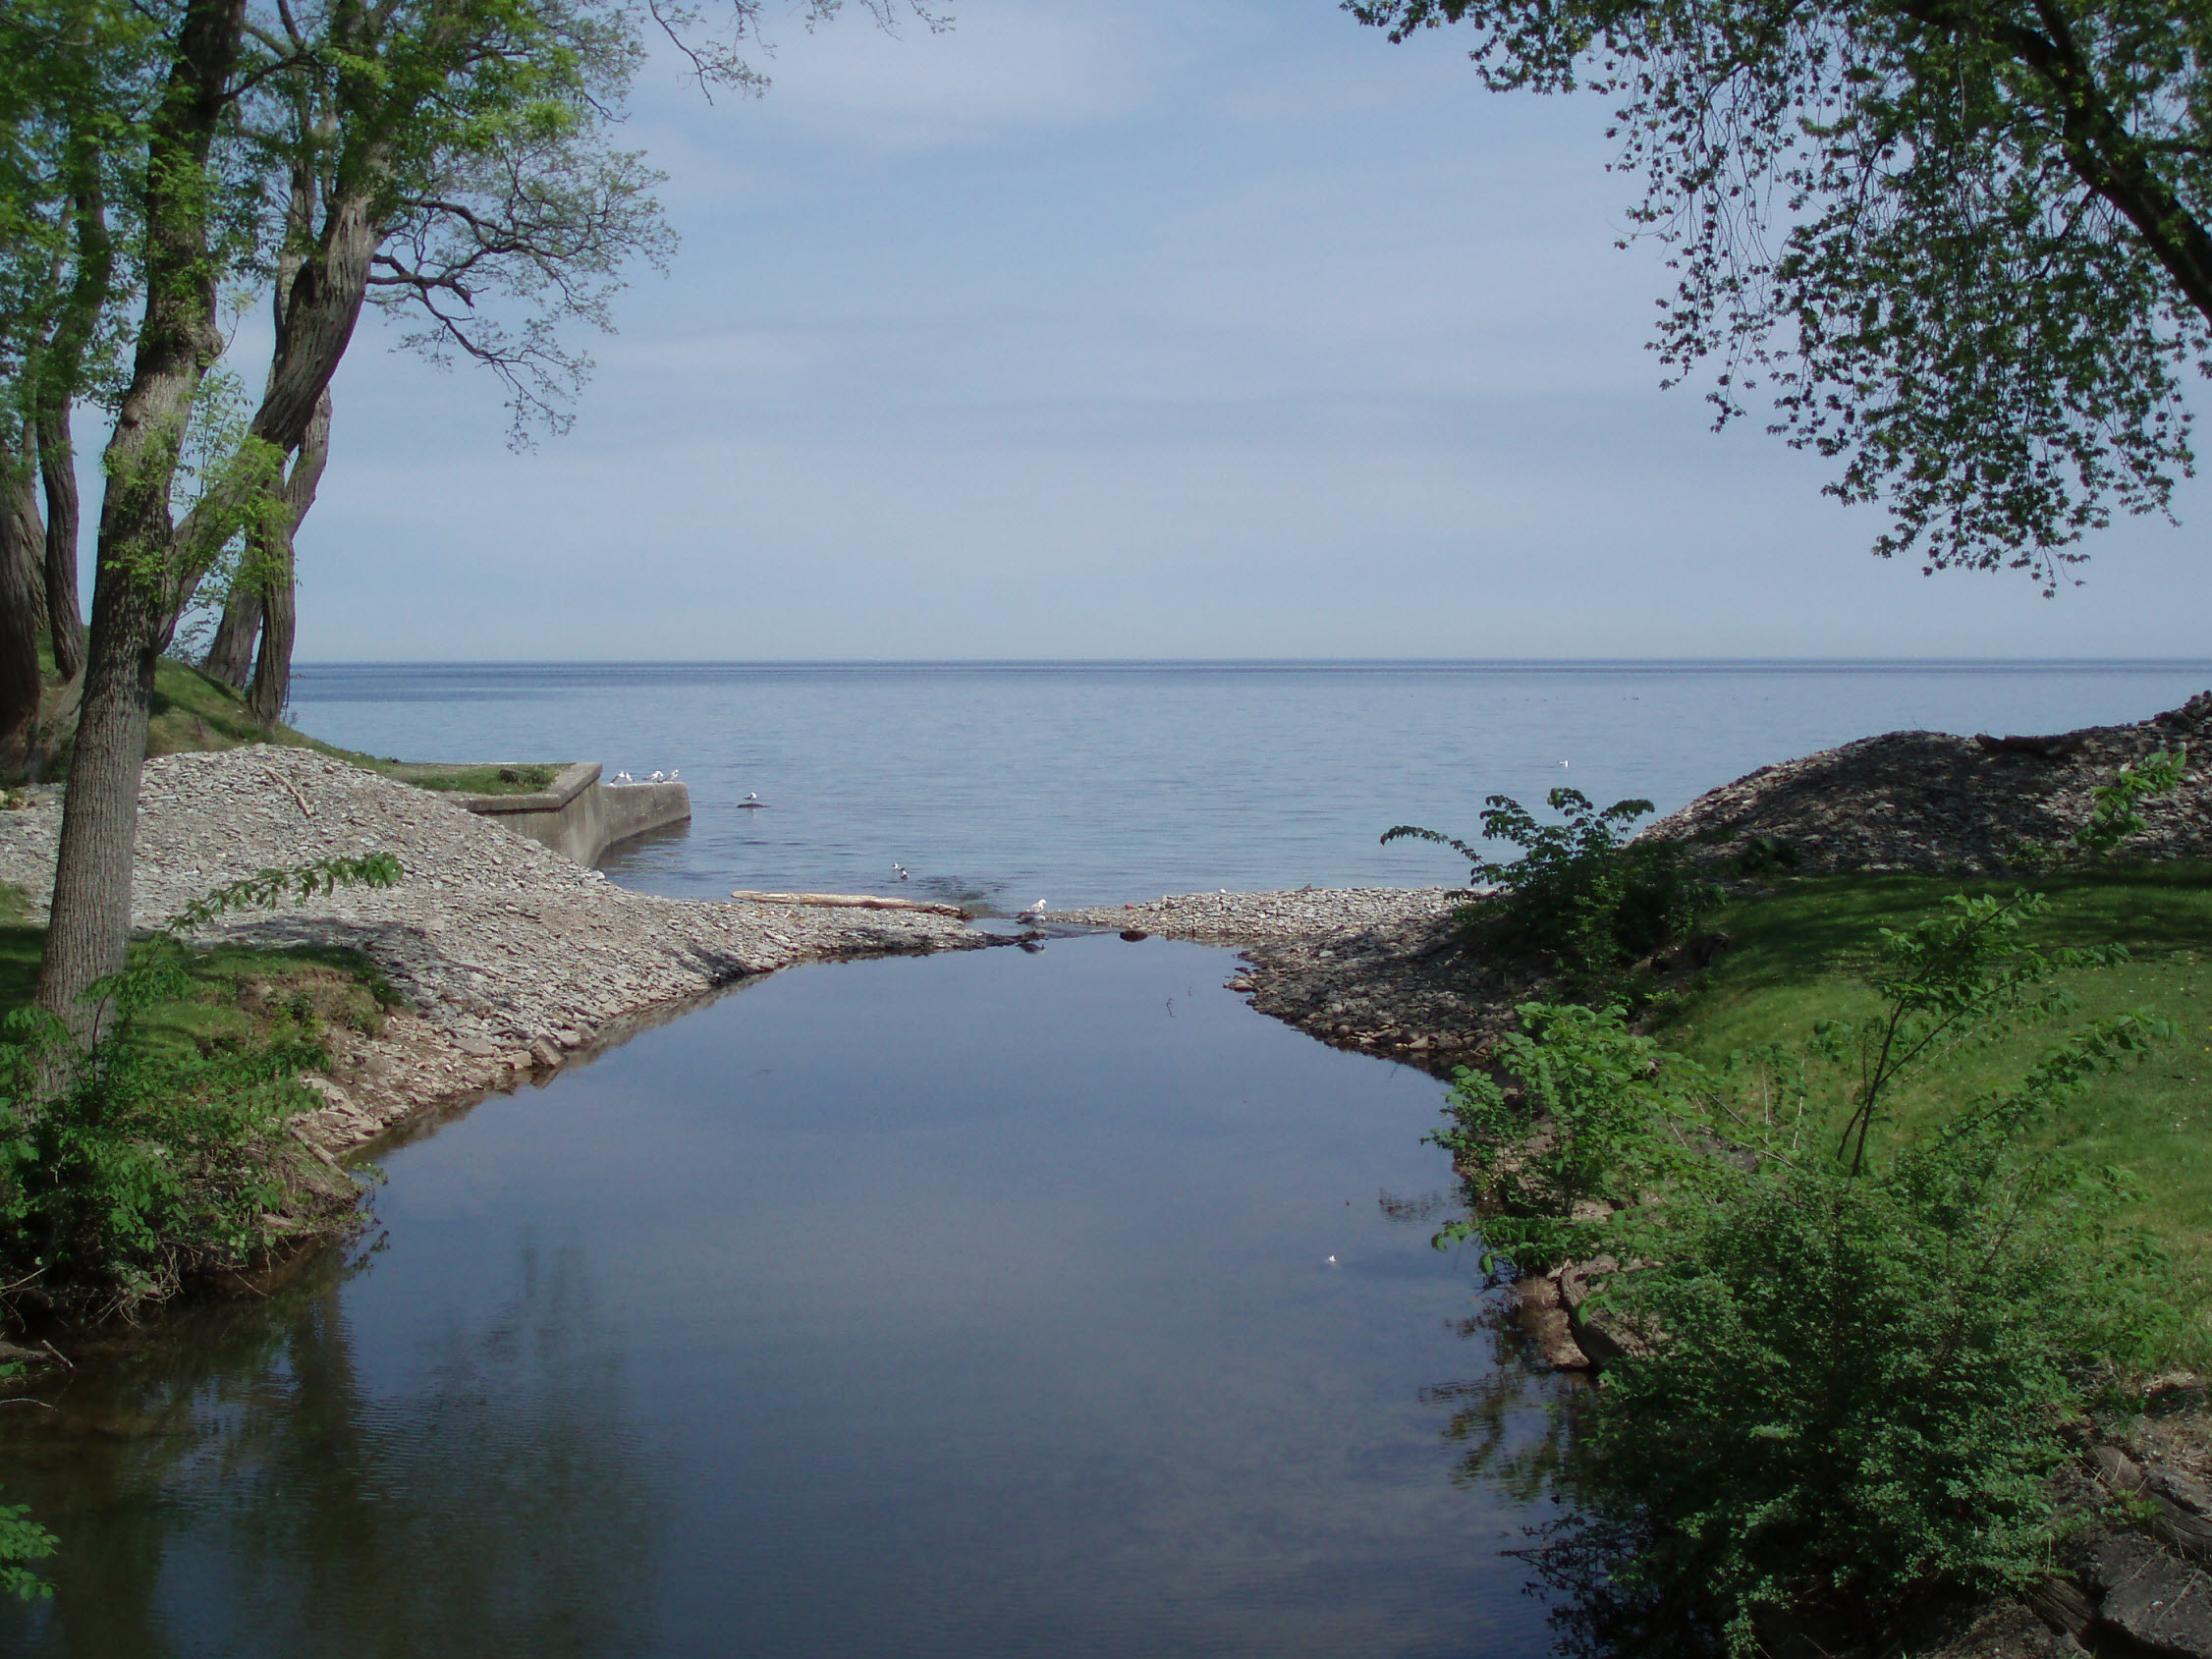 Lake_Ontario,_visible_from_the_campus_of_Appleby_College_(2009-05-22)